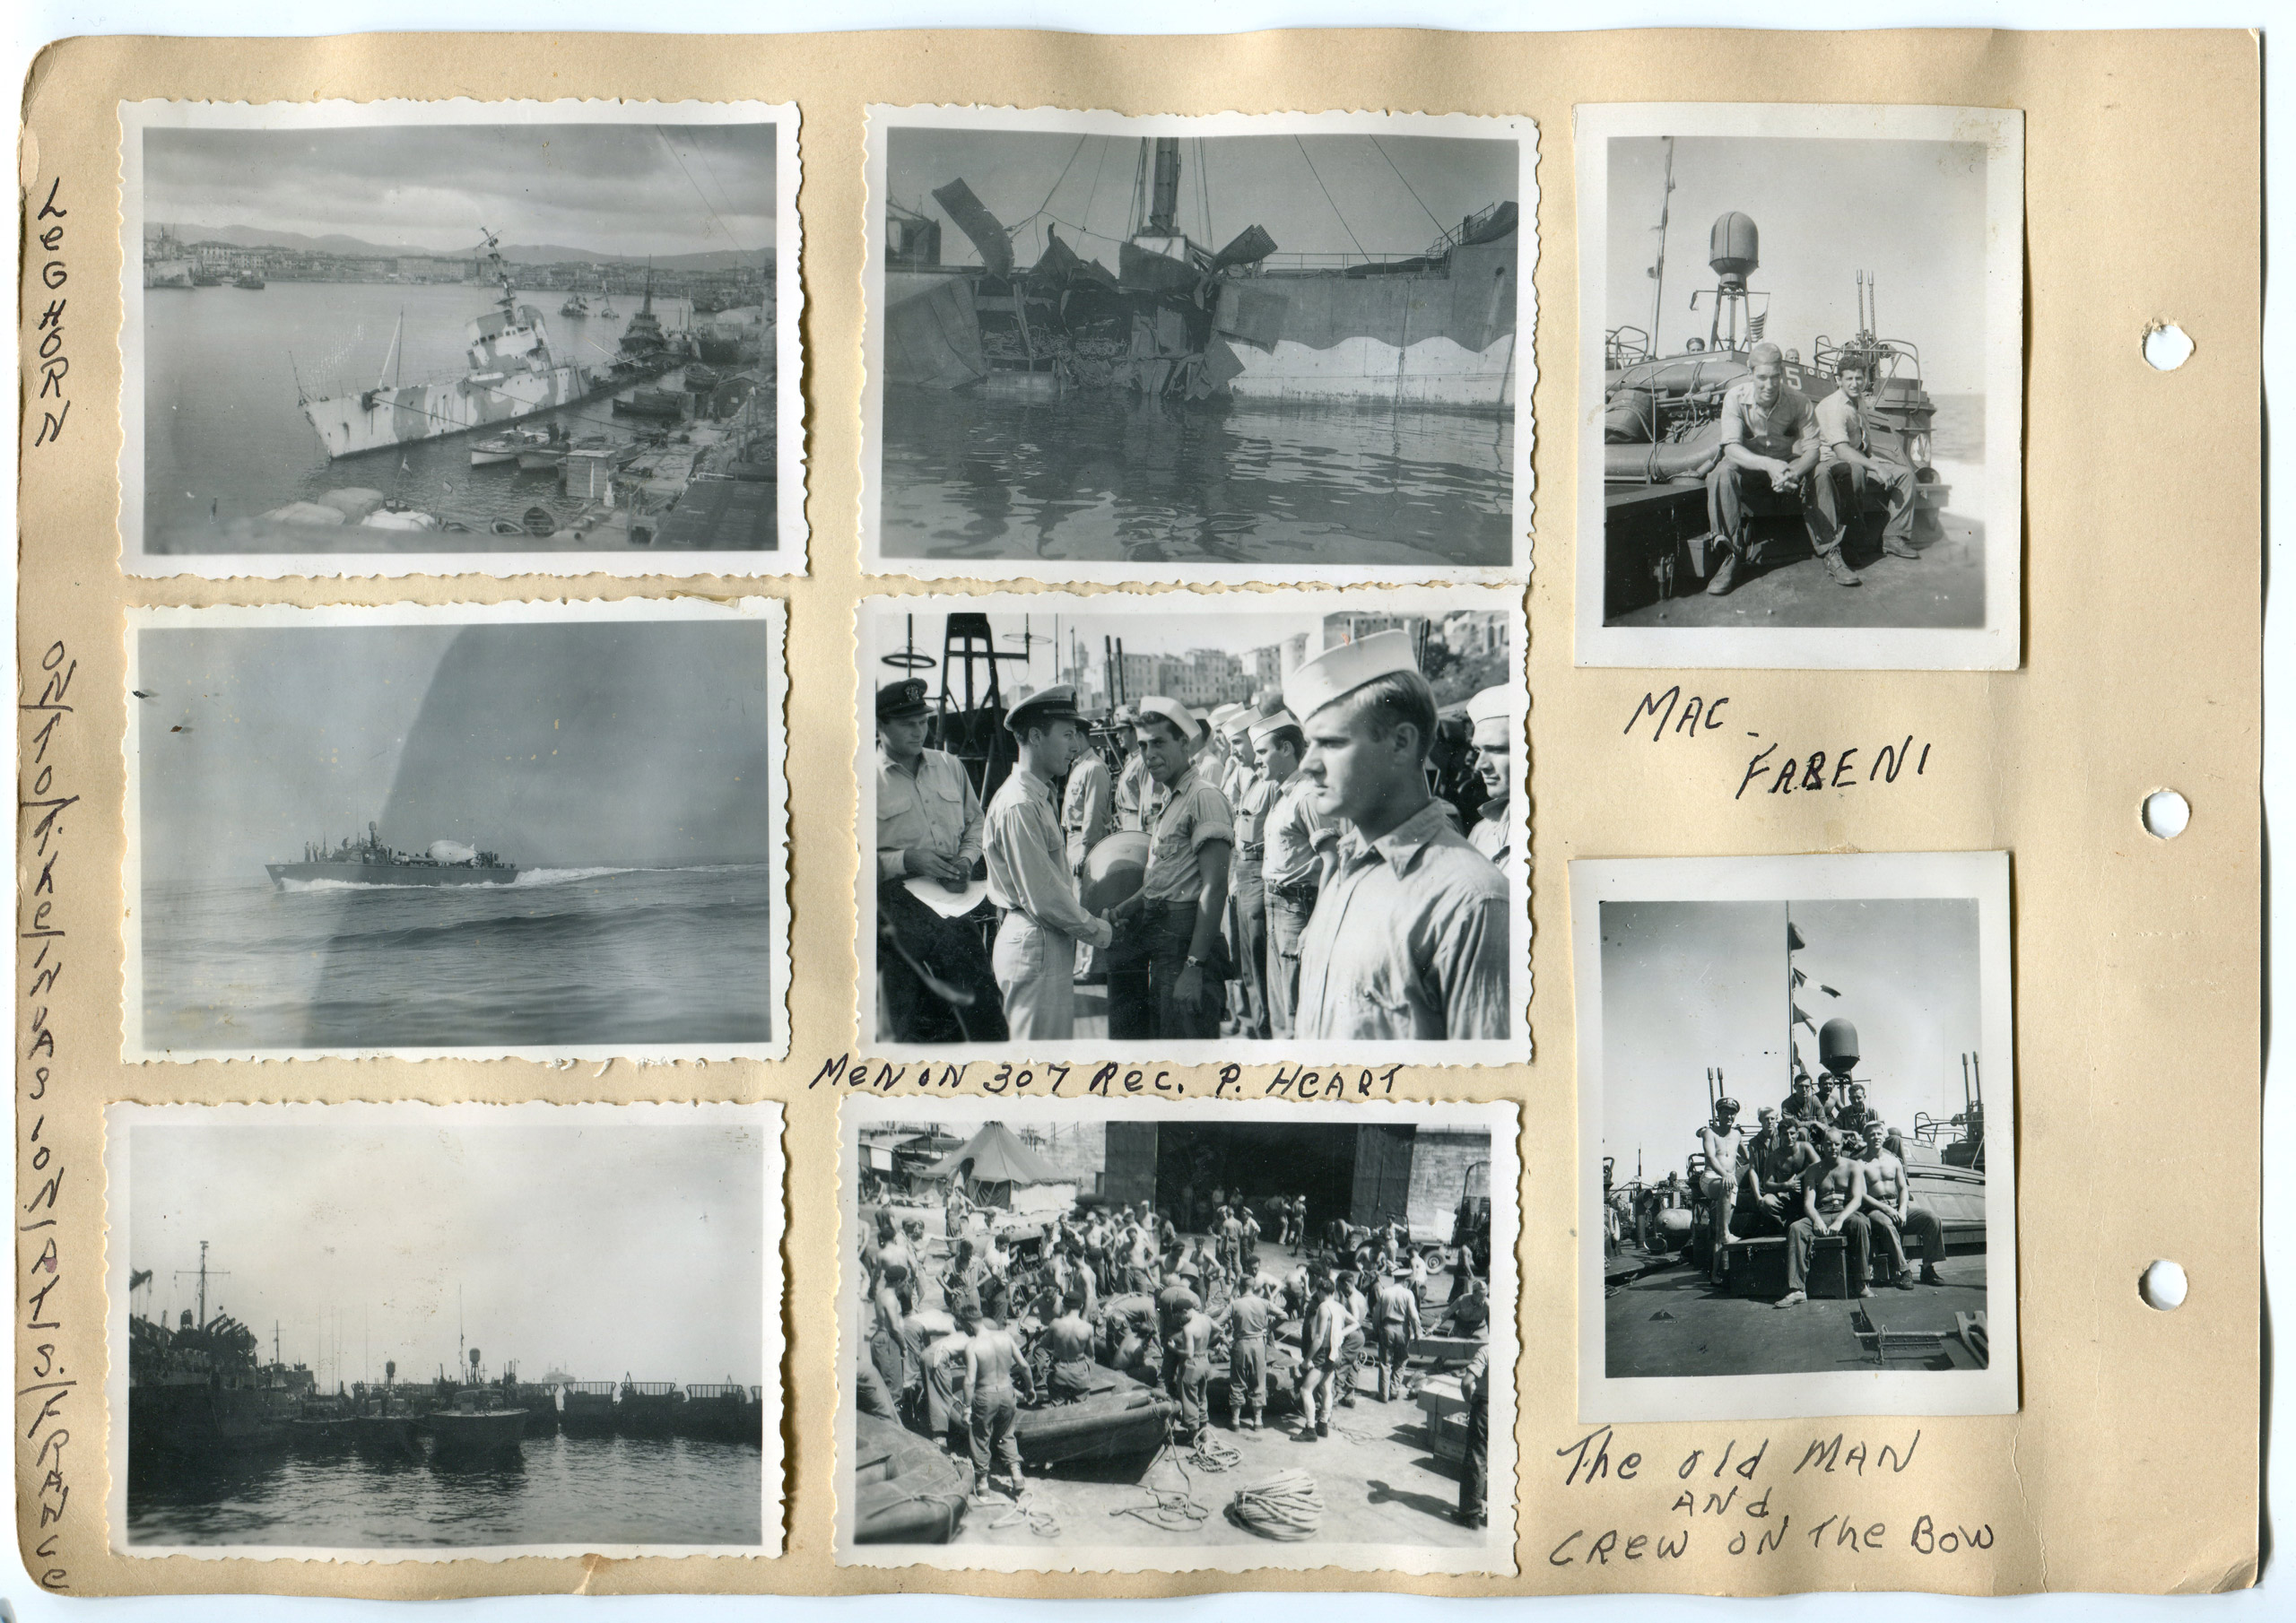 Scrapbook and photos by Motor Machinist's Mate 2nd Class Caption Edric Costain while serving on PT-305 from 1944-1945.